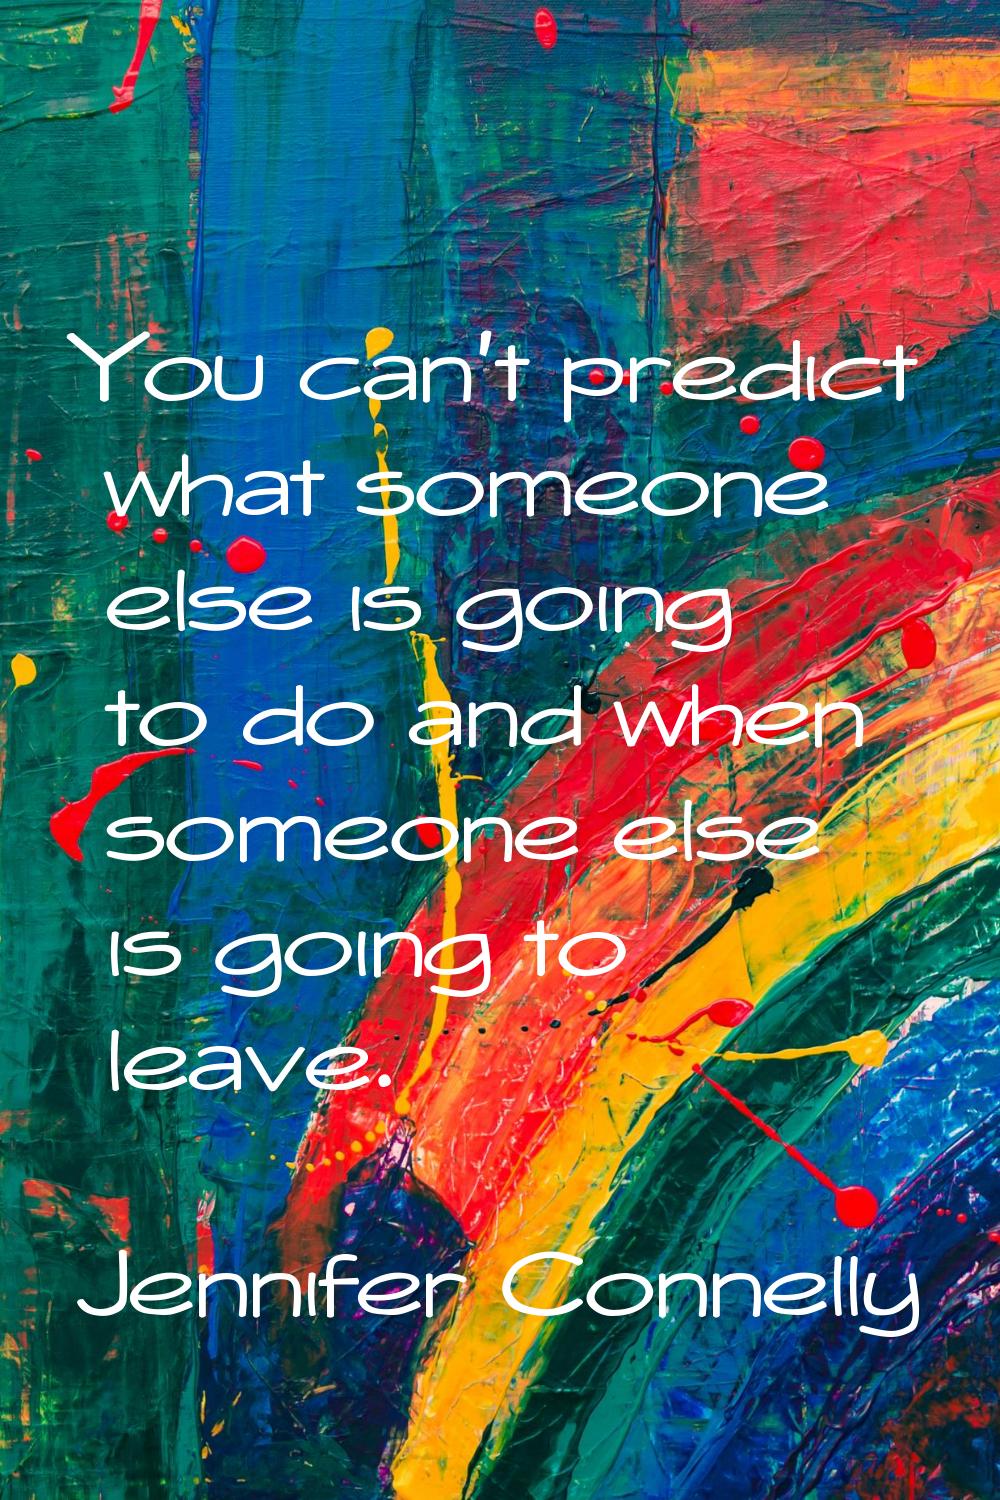 You can't predict what someone else is going to do and when someone else is going to leave.